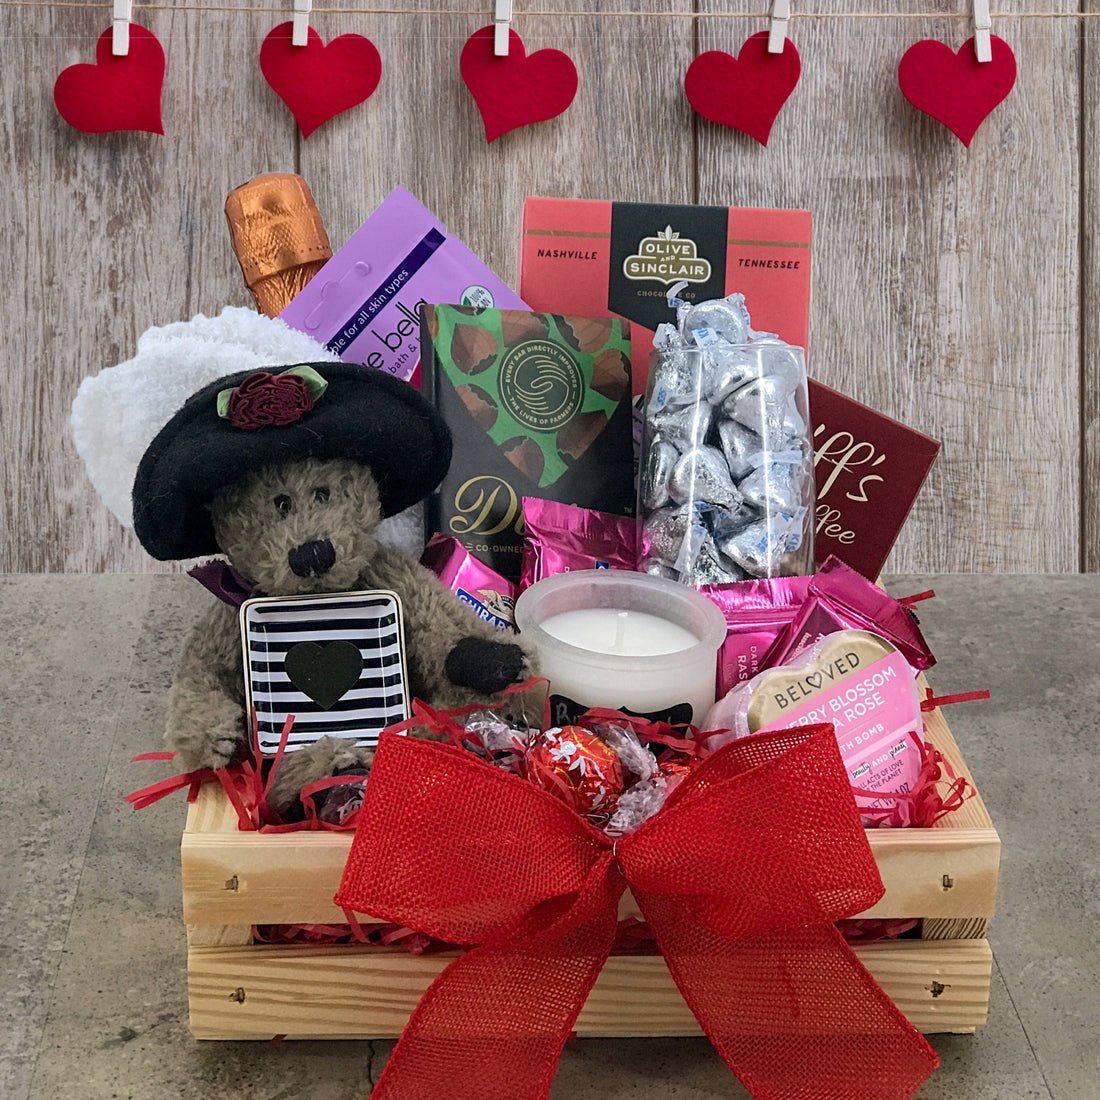 How to make Valentines gift baskets